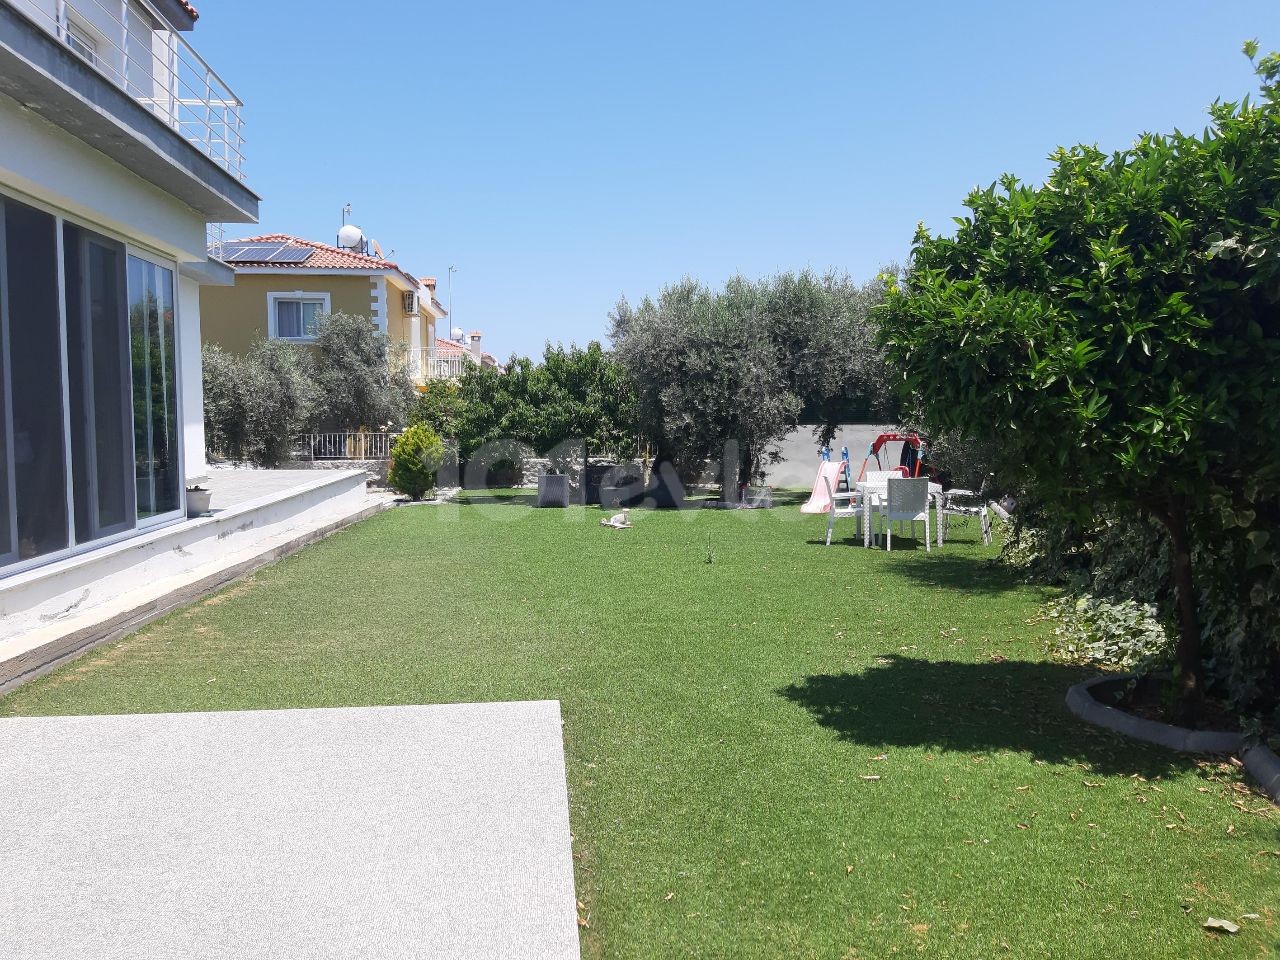 A DETACHED DUPLEX VILLA WITH AN EQUIVALENT COB, FIREPLACE, BARBECUE, GARDEN WITH AN INDOOR AREA OF 4 + 1, 290 SQUARE METERS ON A CORNER PLOT OF 600 SQUARE METERS WITH A FACADE Decking OUT ON BOTH SIDES, IN A VERY GOOD LOCATION IN KYRENIA ** 